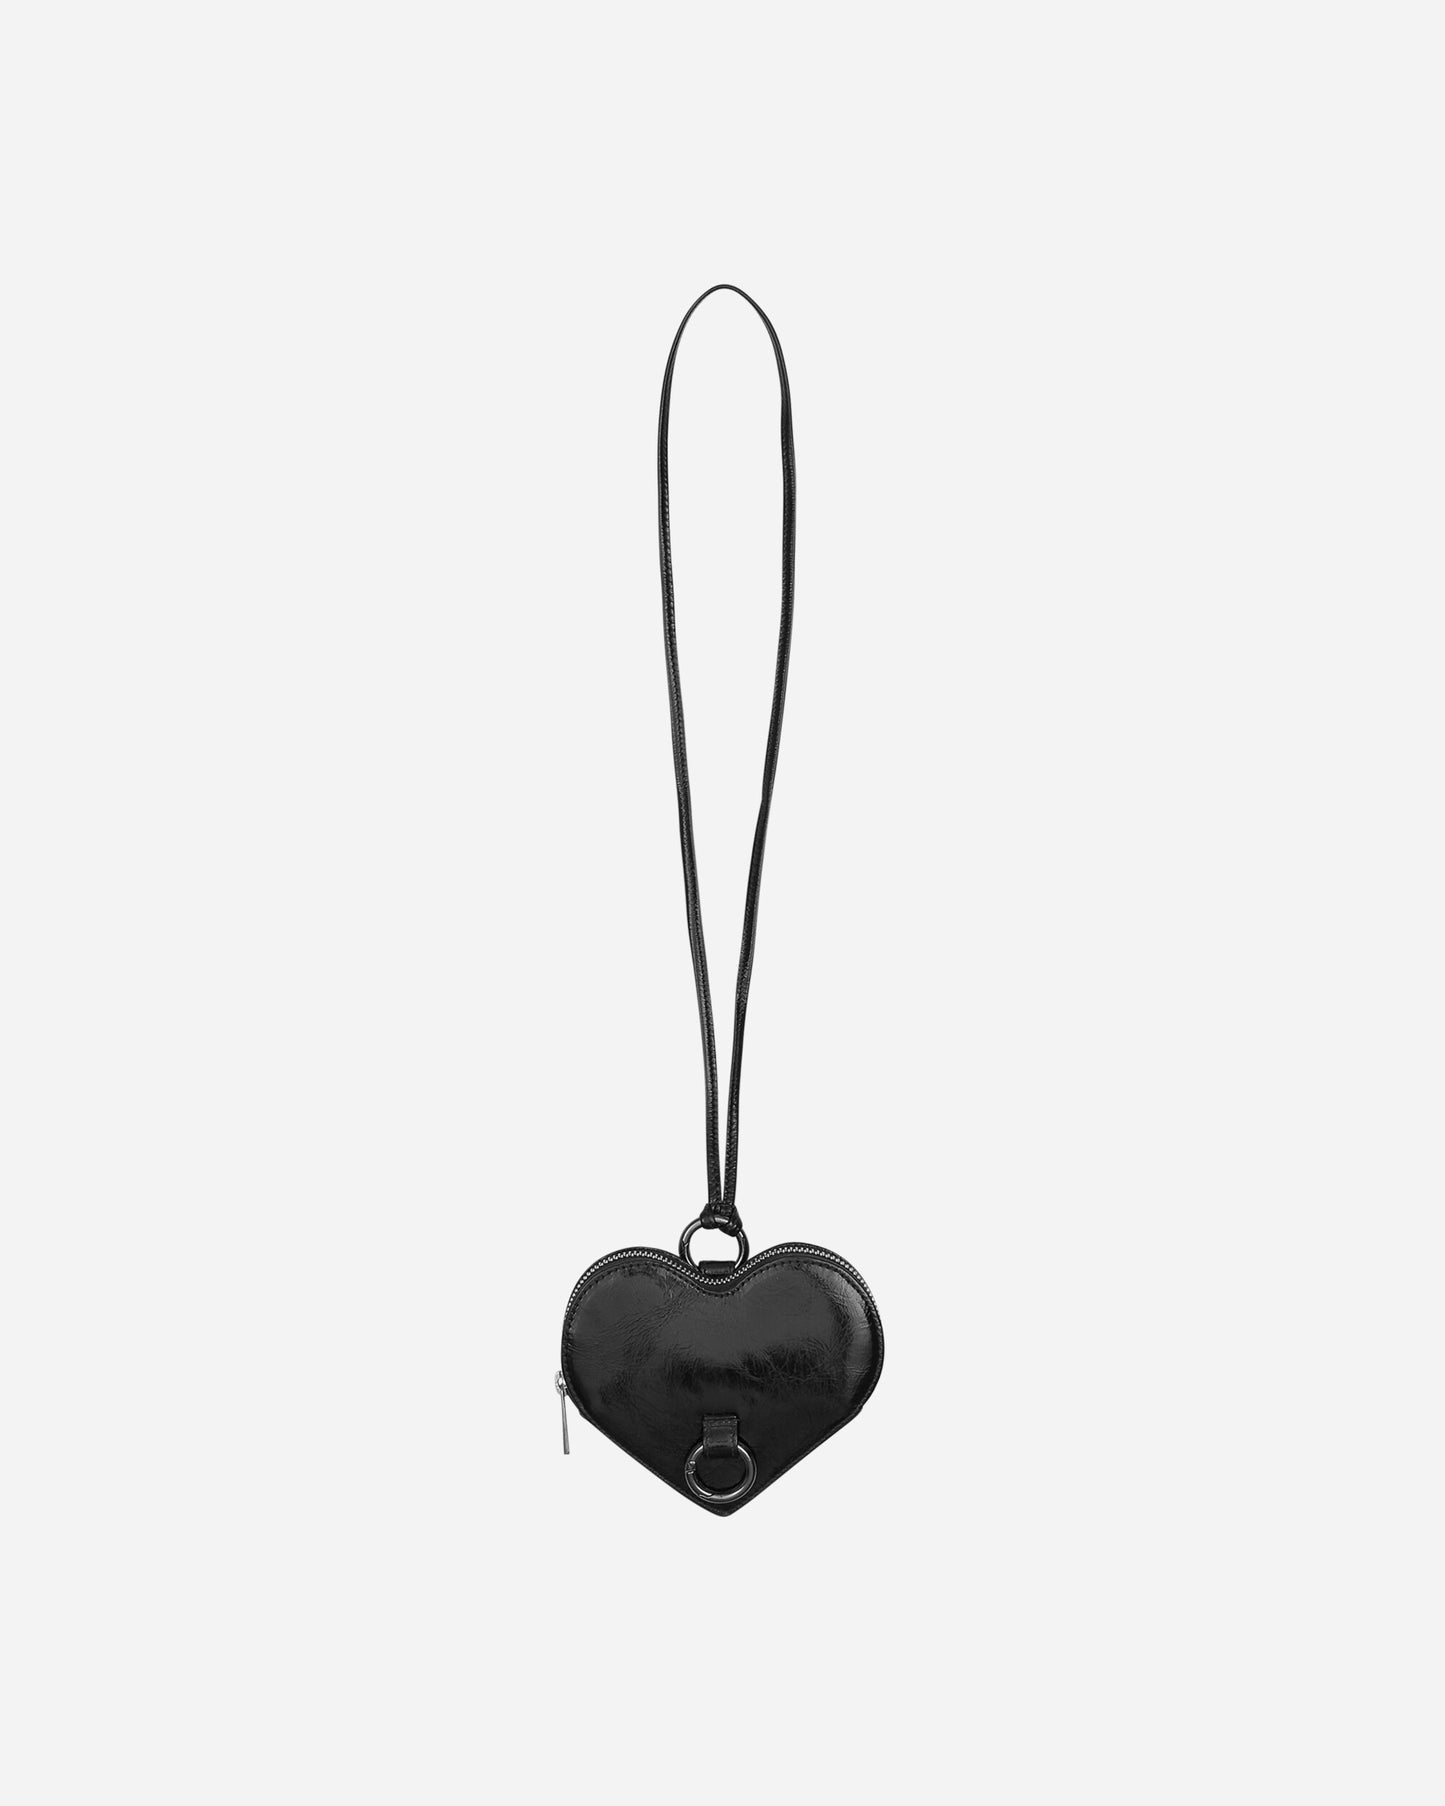 Safsafu Wmns Amor Neck Wallet Black Exclusive Black Bags and Backpacks Pouches 1-23-B9 007